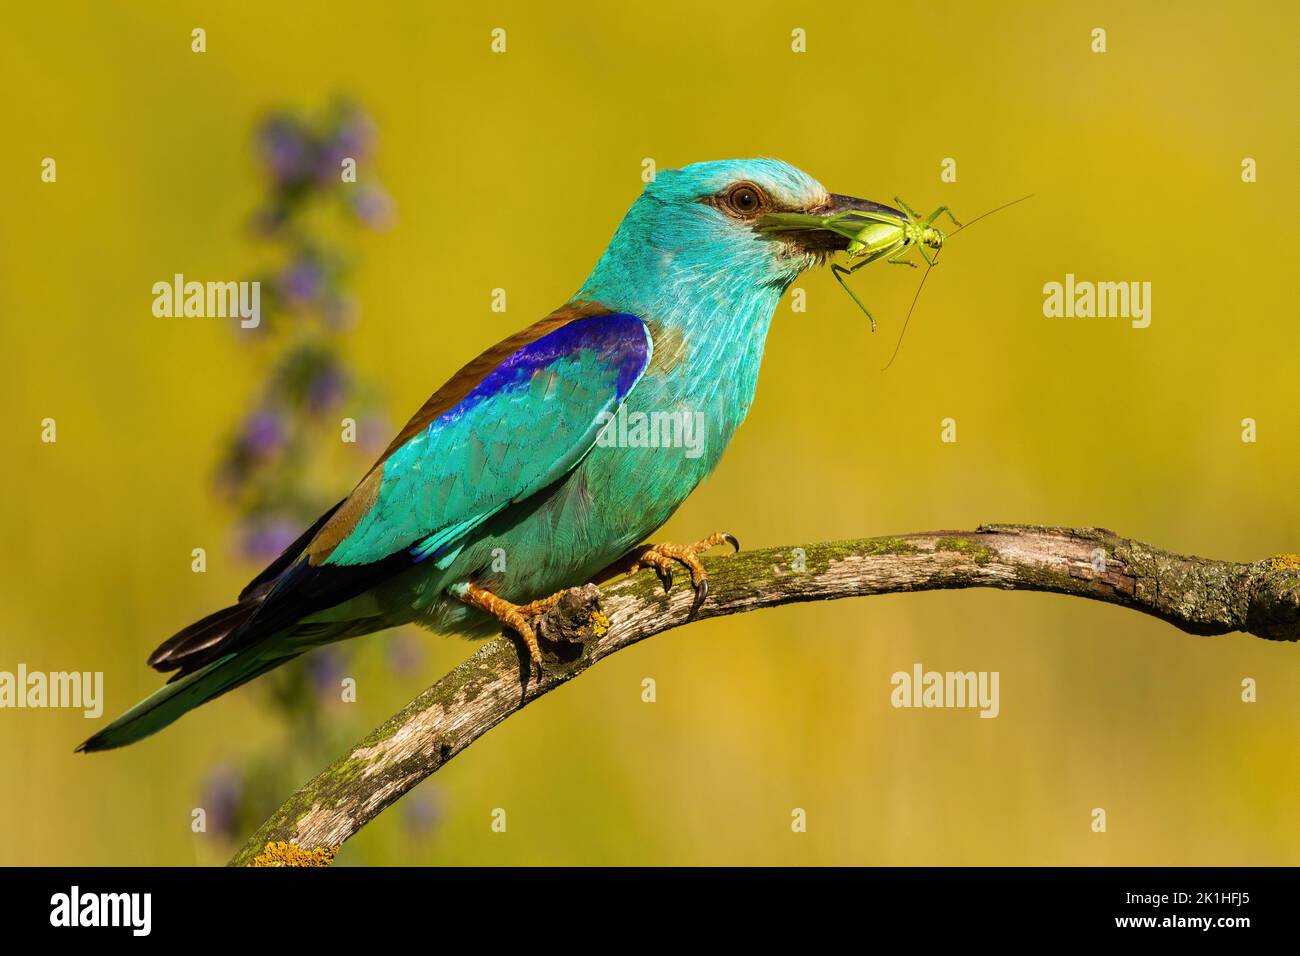 European roller holding a green grasshopper in a beak and sitting on a branch Stock Photo